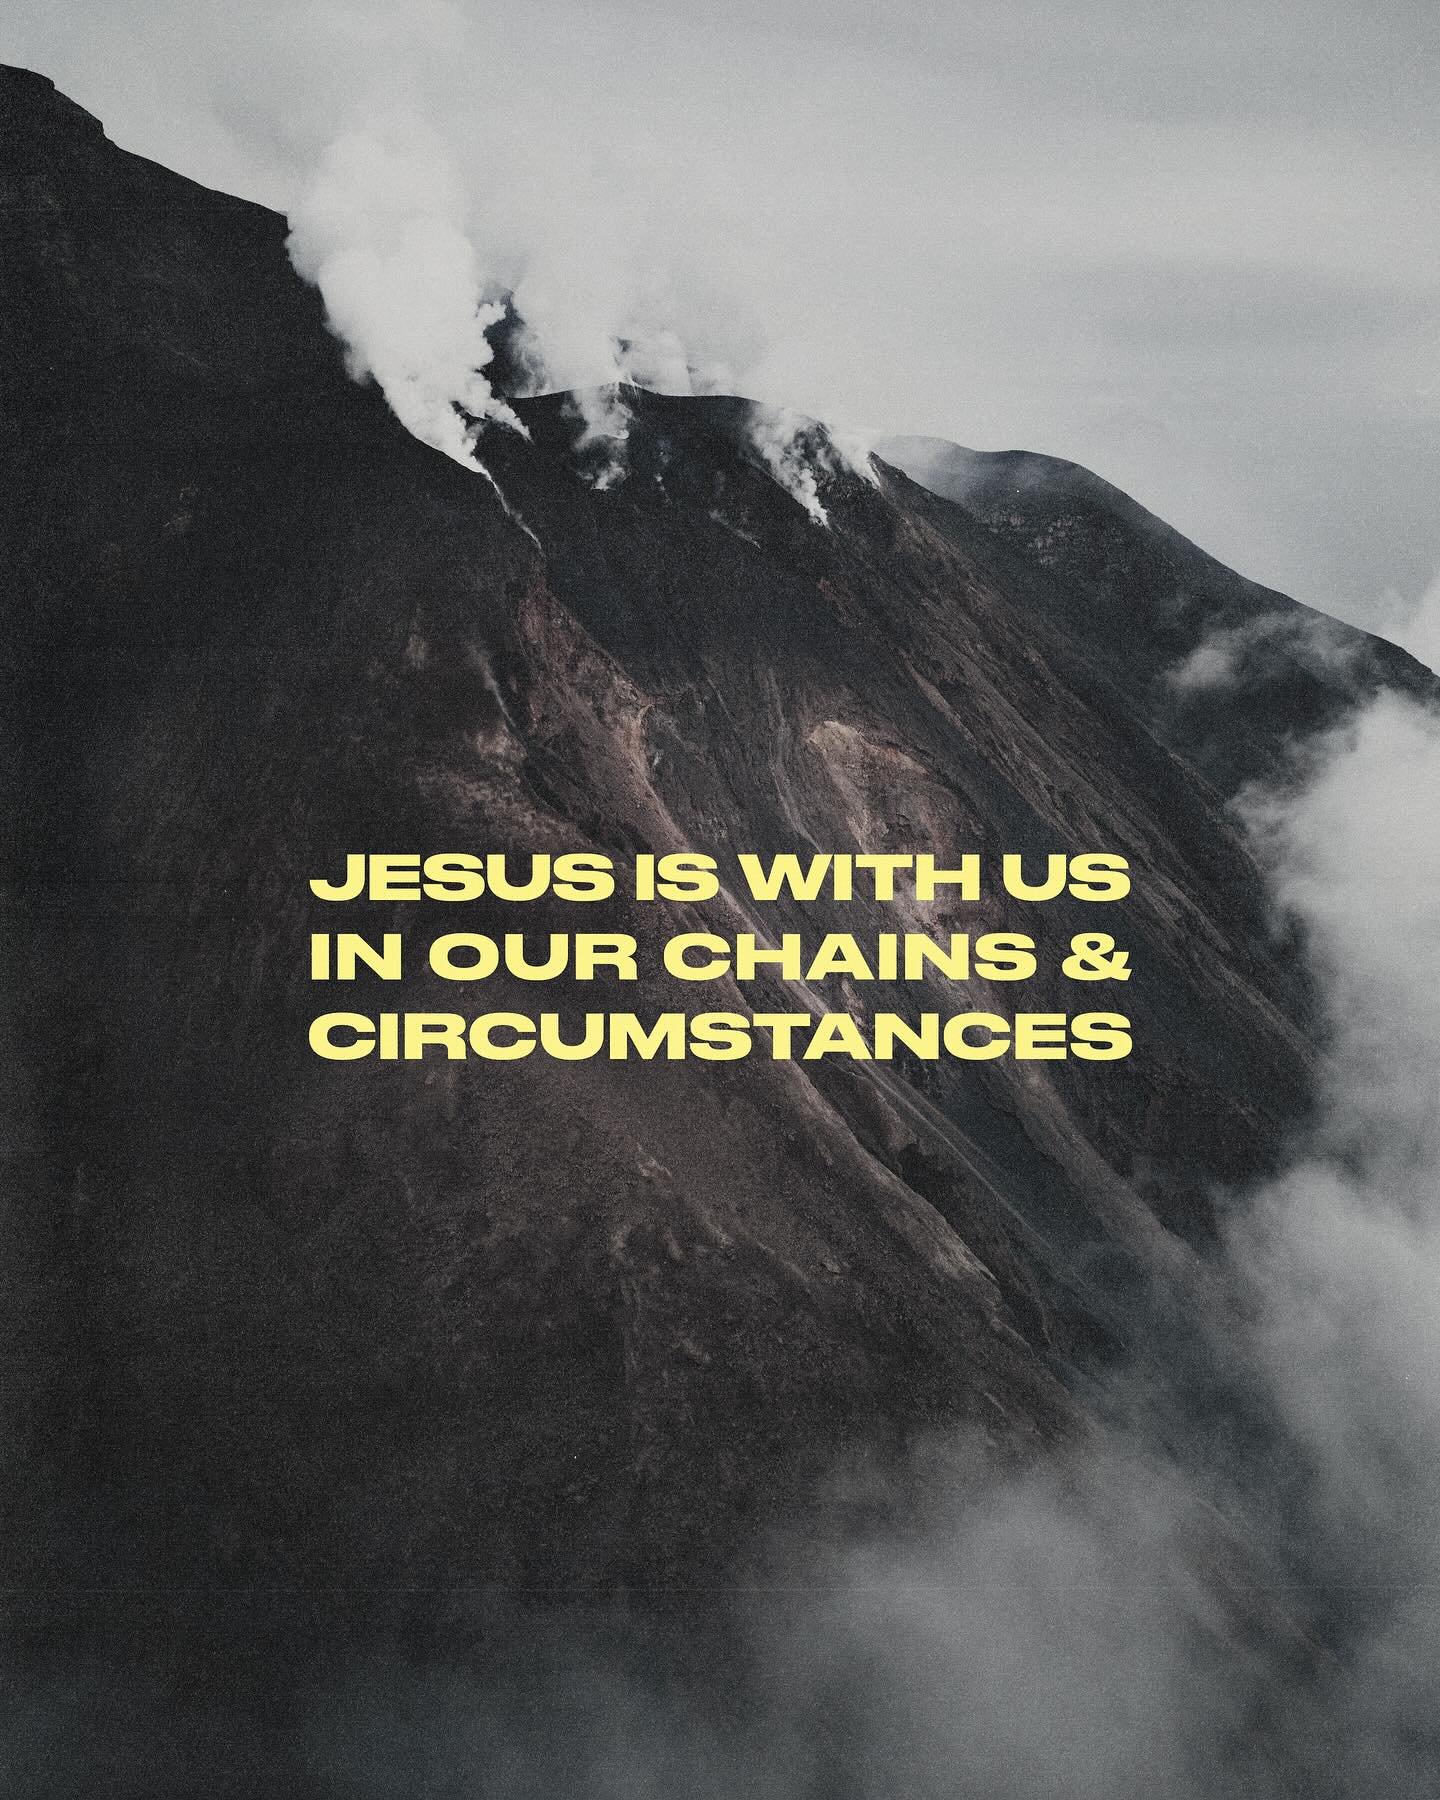 You are not alone. 

It might feel like it at times, but Jesus is with you in your chains and circumstances, and He can use your hardships for your good and His glory.

Draw close to Him. Pull from His power and let Him sustain you. You&rsquo;ve been